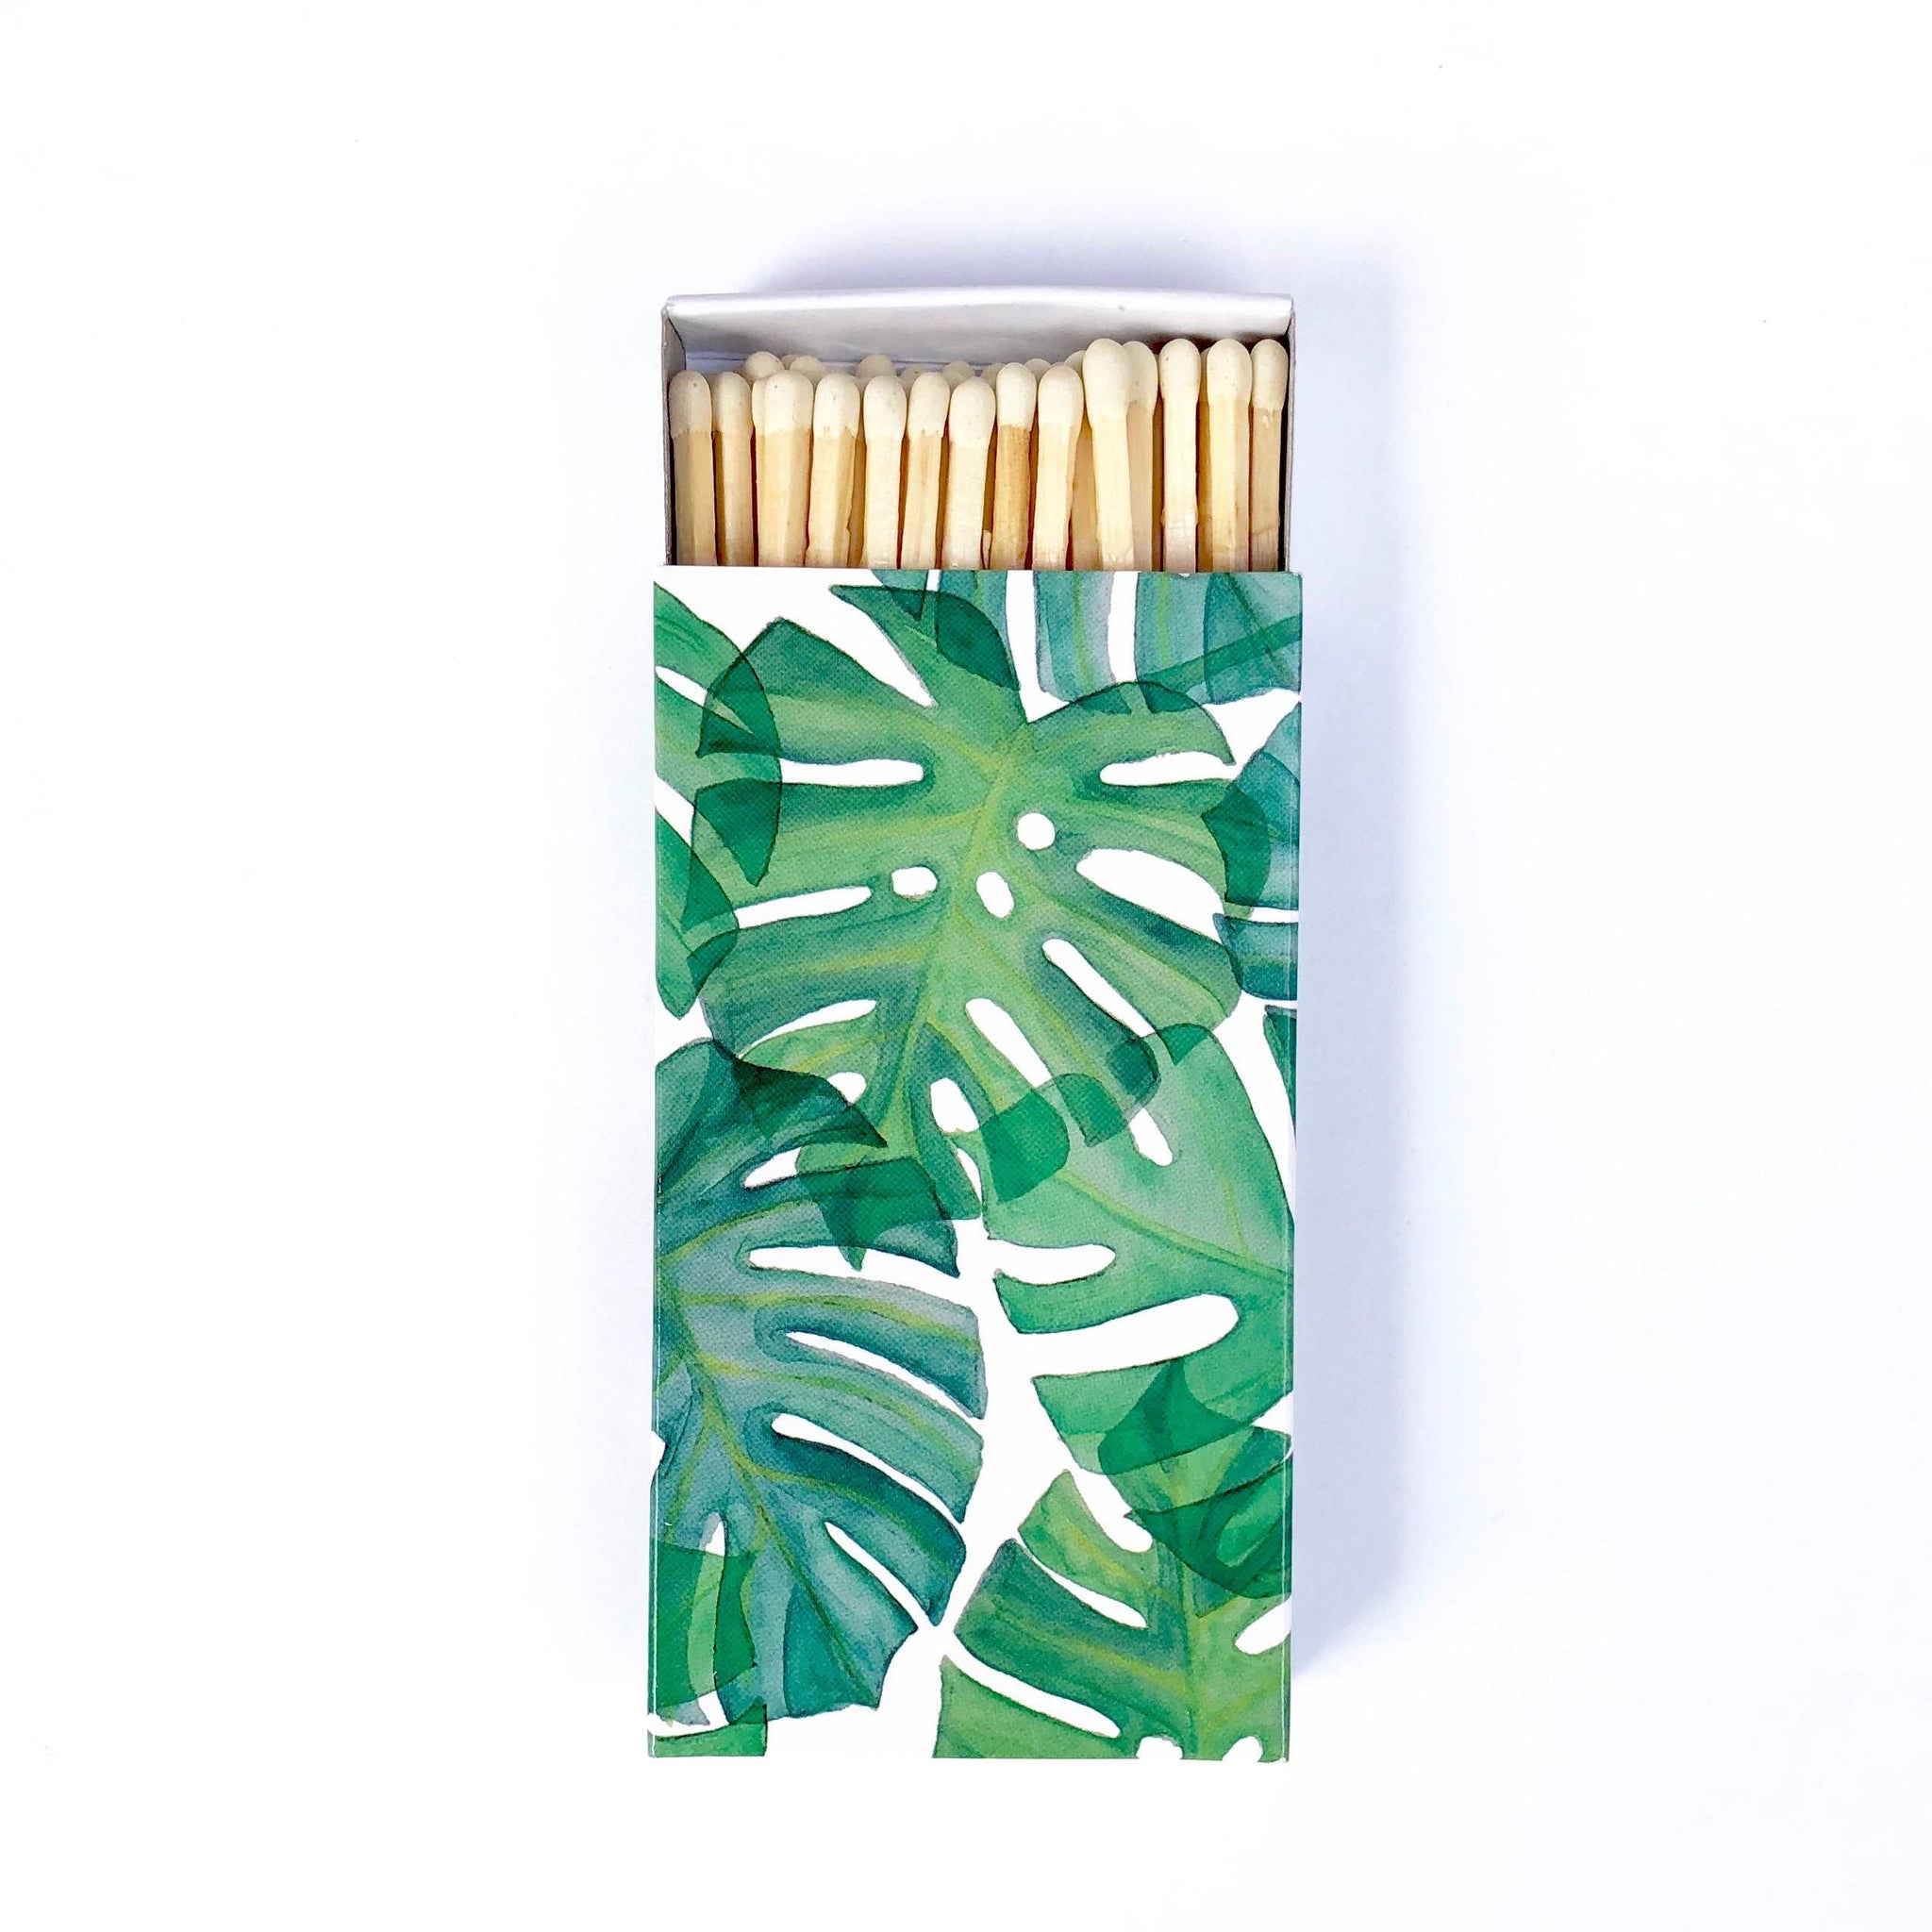 These monstera leaf jumbo matches are perfect for lighting our hand poured soy candles!  These decorative matches are a lovely addition to enhance any home décor.  Our designer match boxes are reusable, and each comes with 50 matches tipped in white.